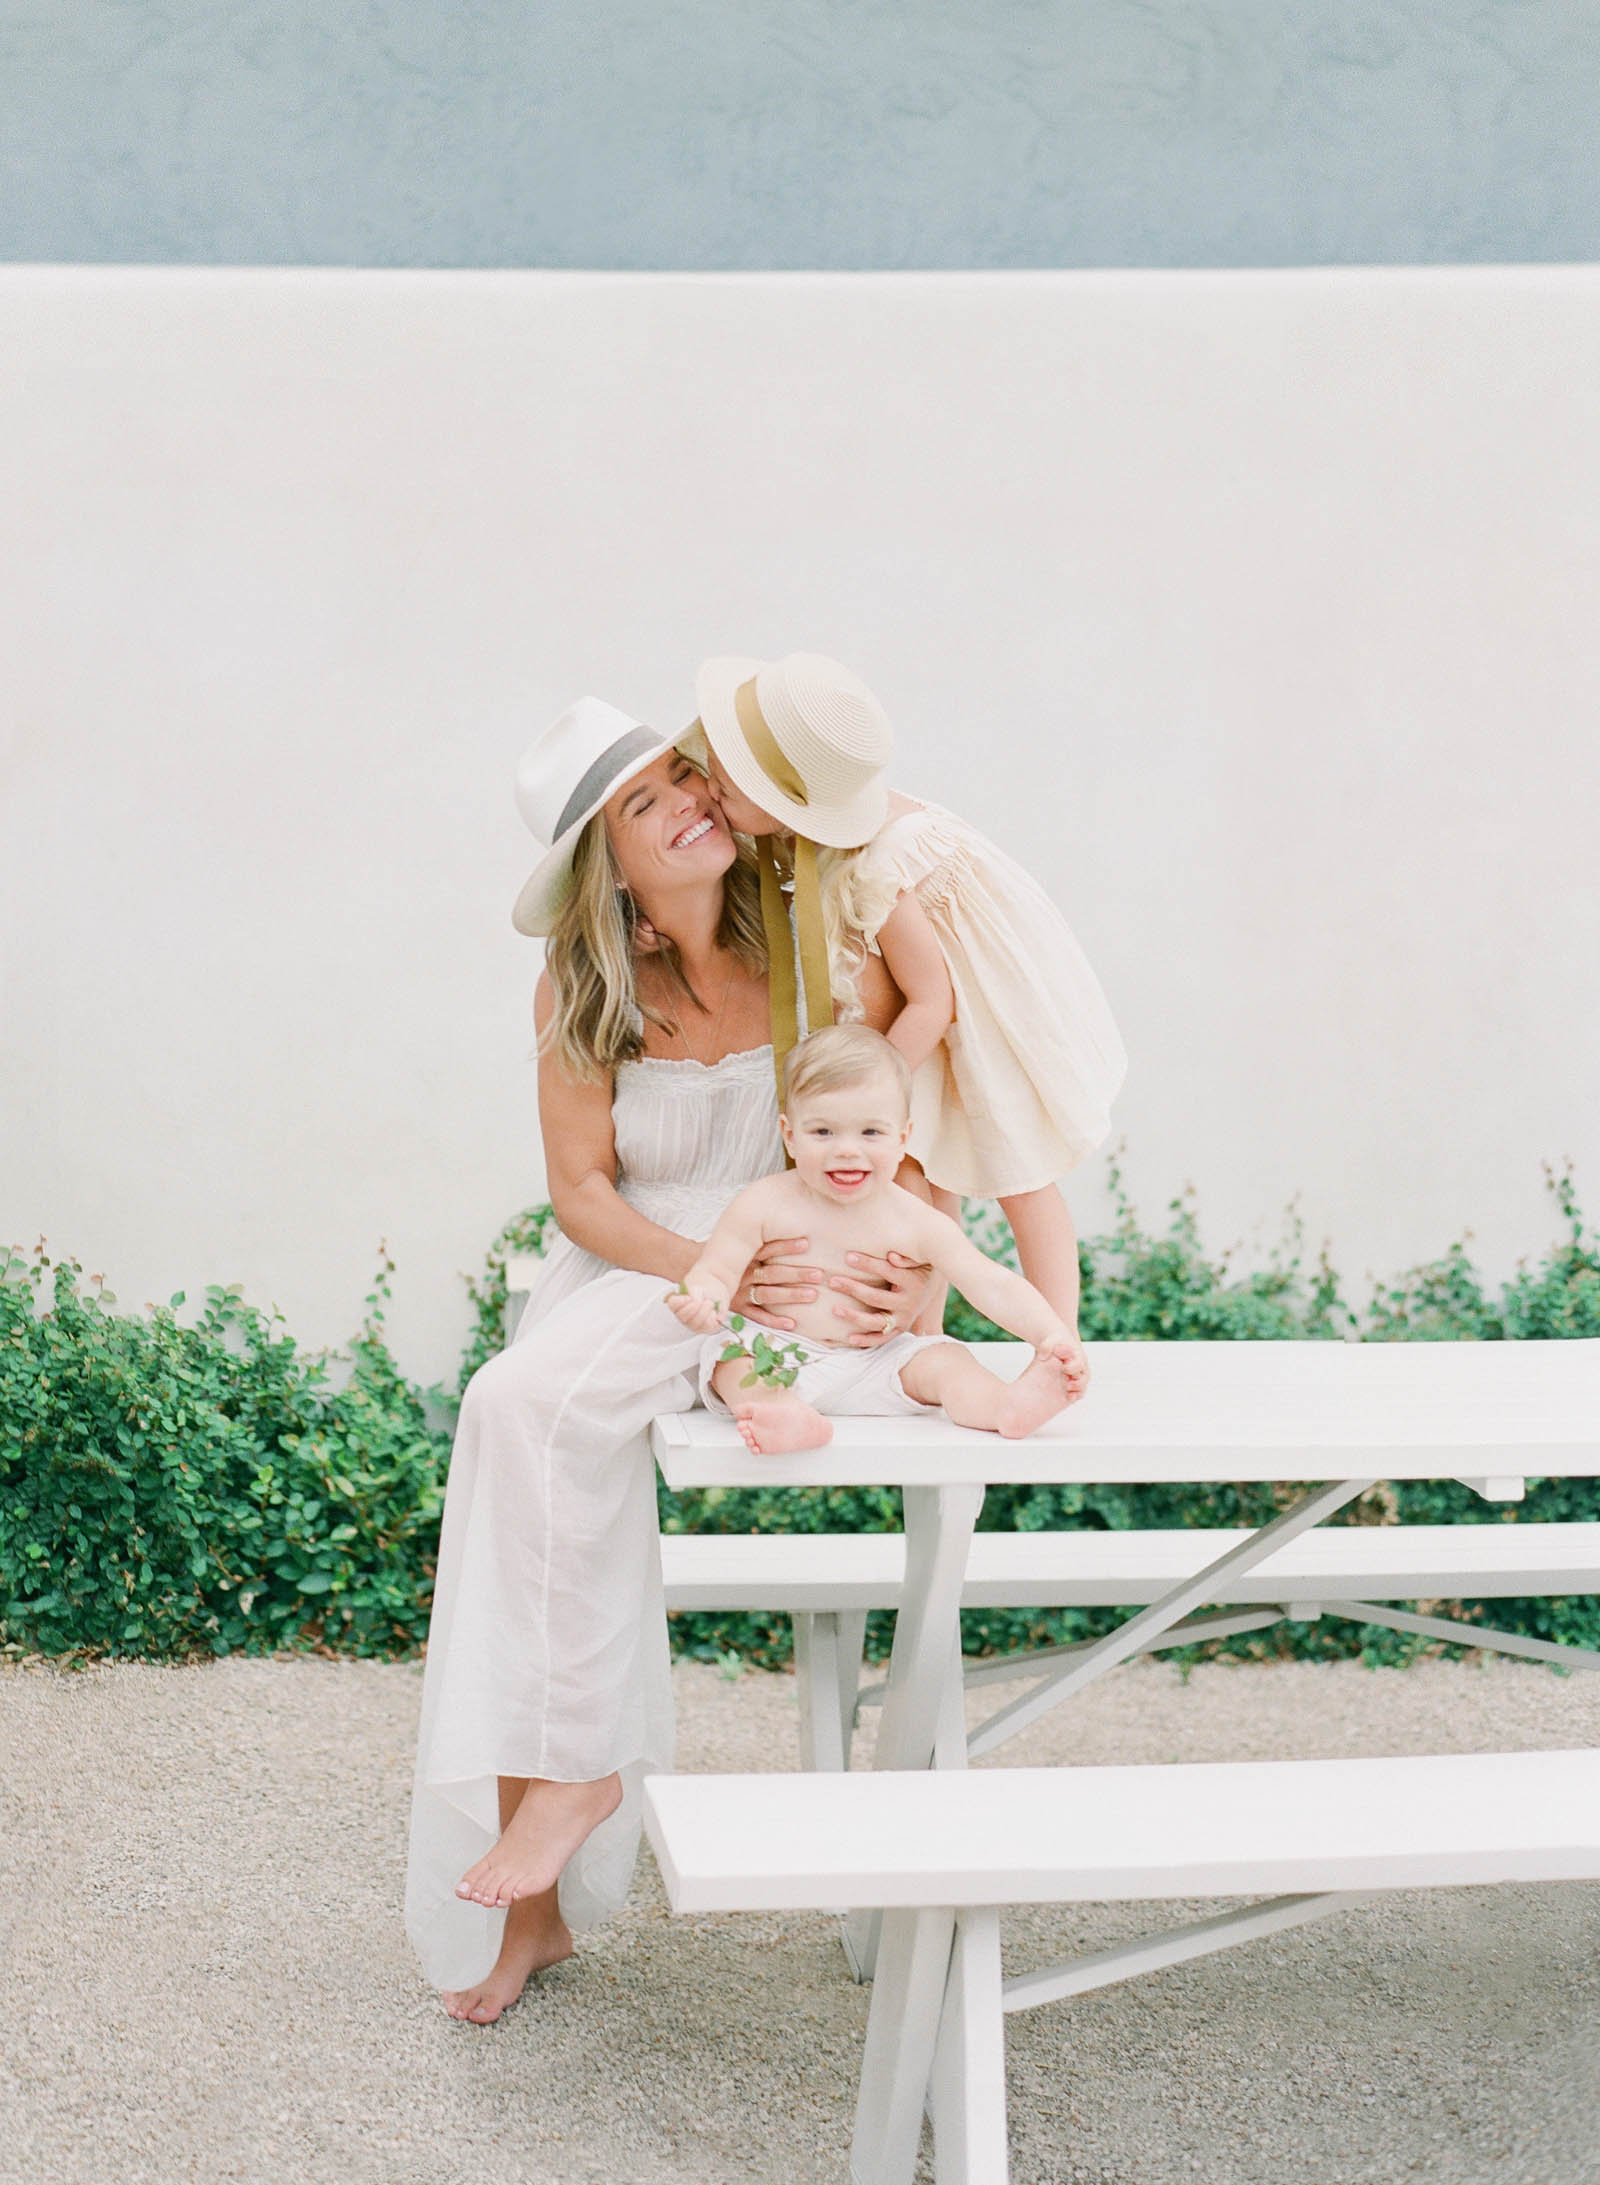 SF Bay Area Family Photography on Film